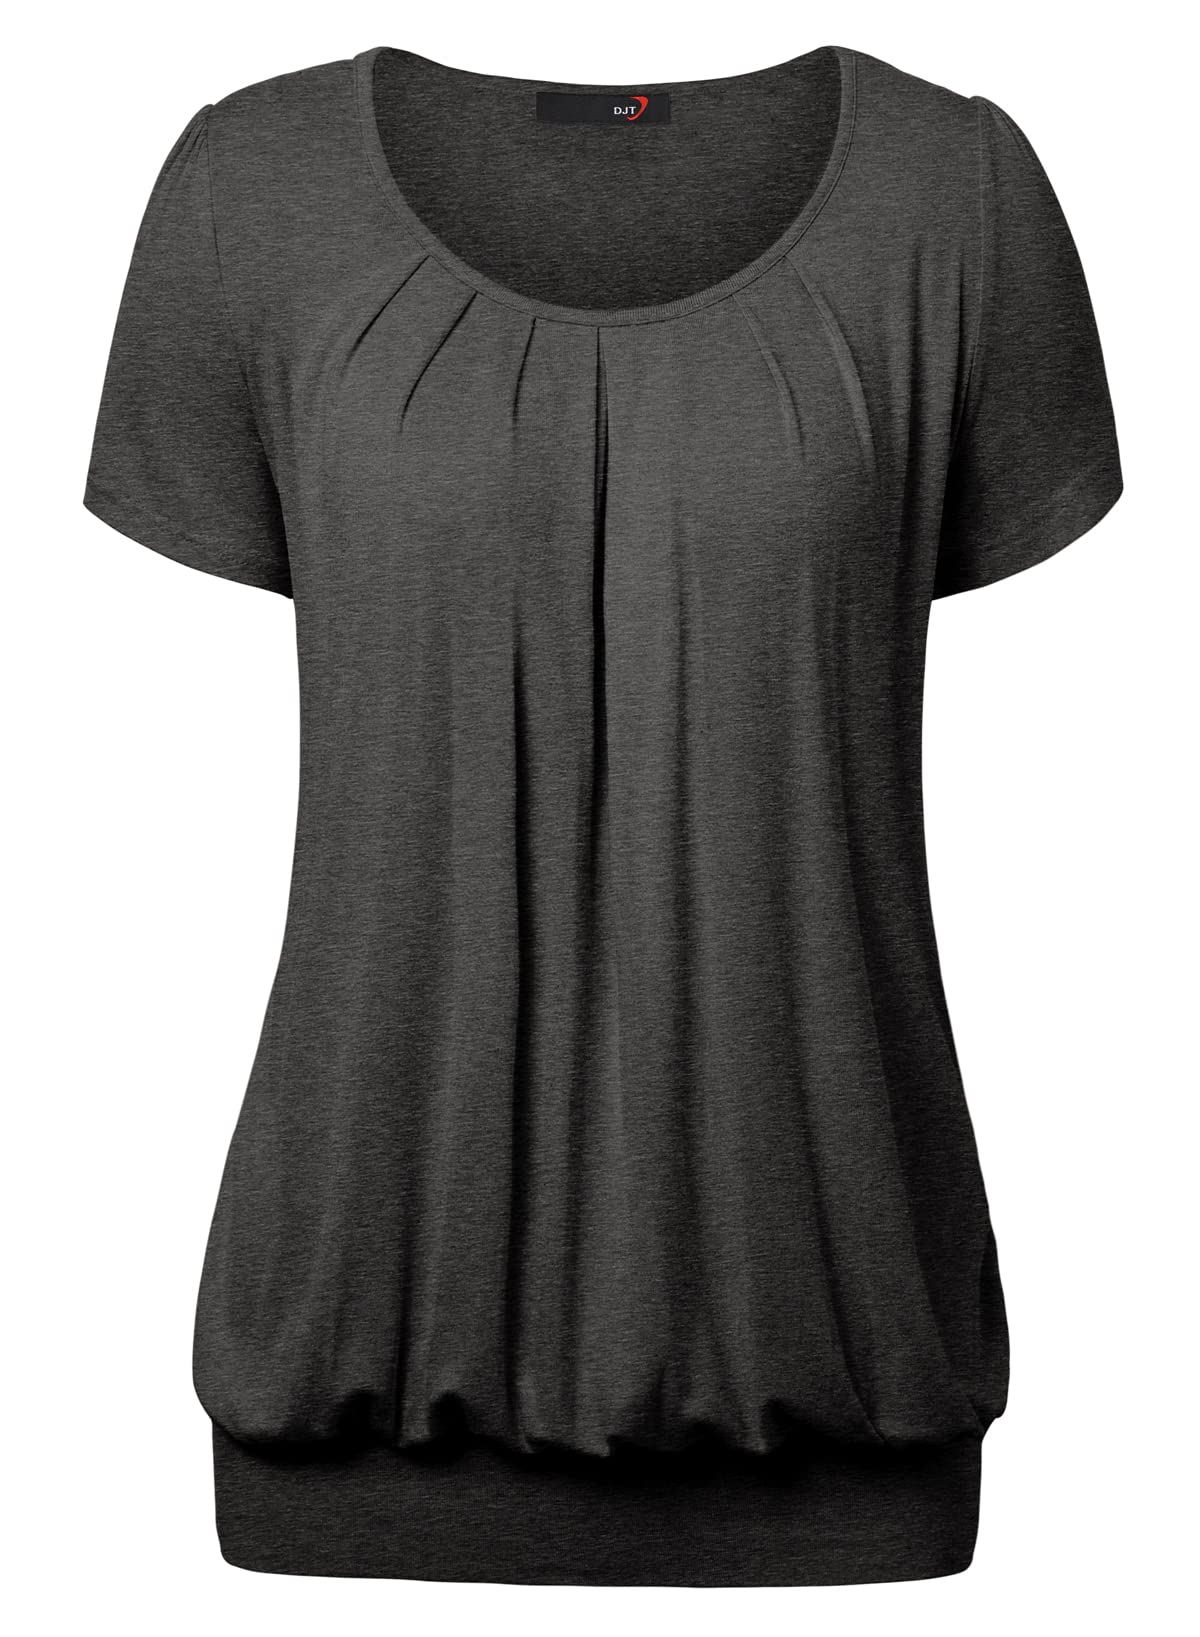 DJT Scoop Neck Grey Short Sleeve Women's Pleated Front Blouse Tunic Tops